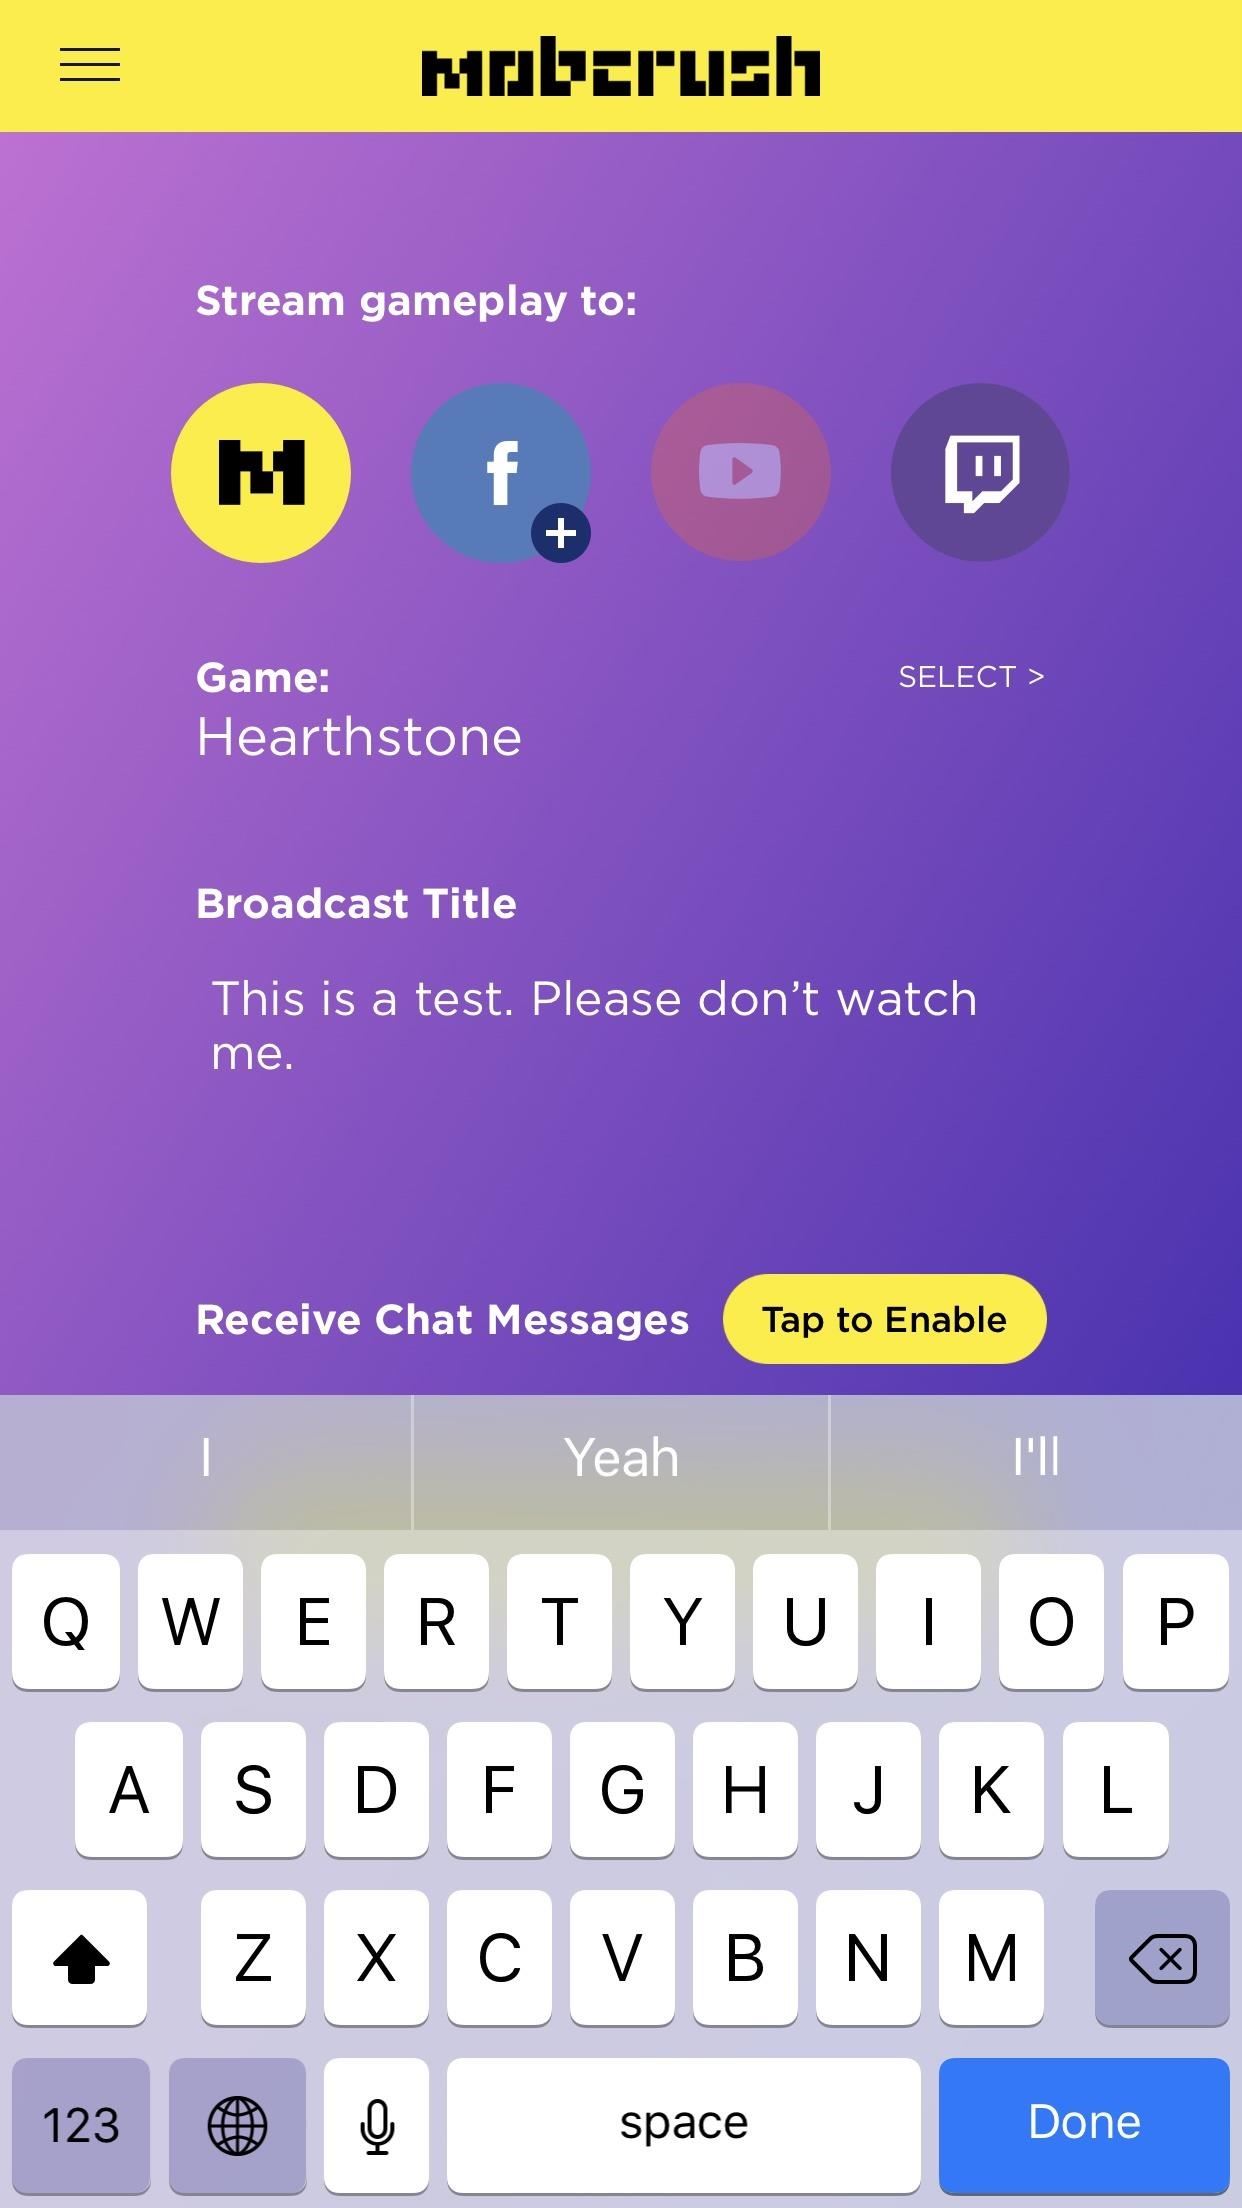 Amazon.com: TChat for Twitch: Appstore for Android